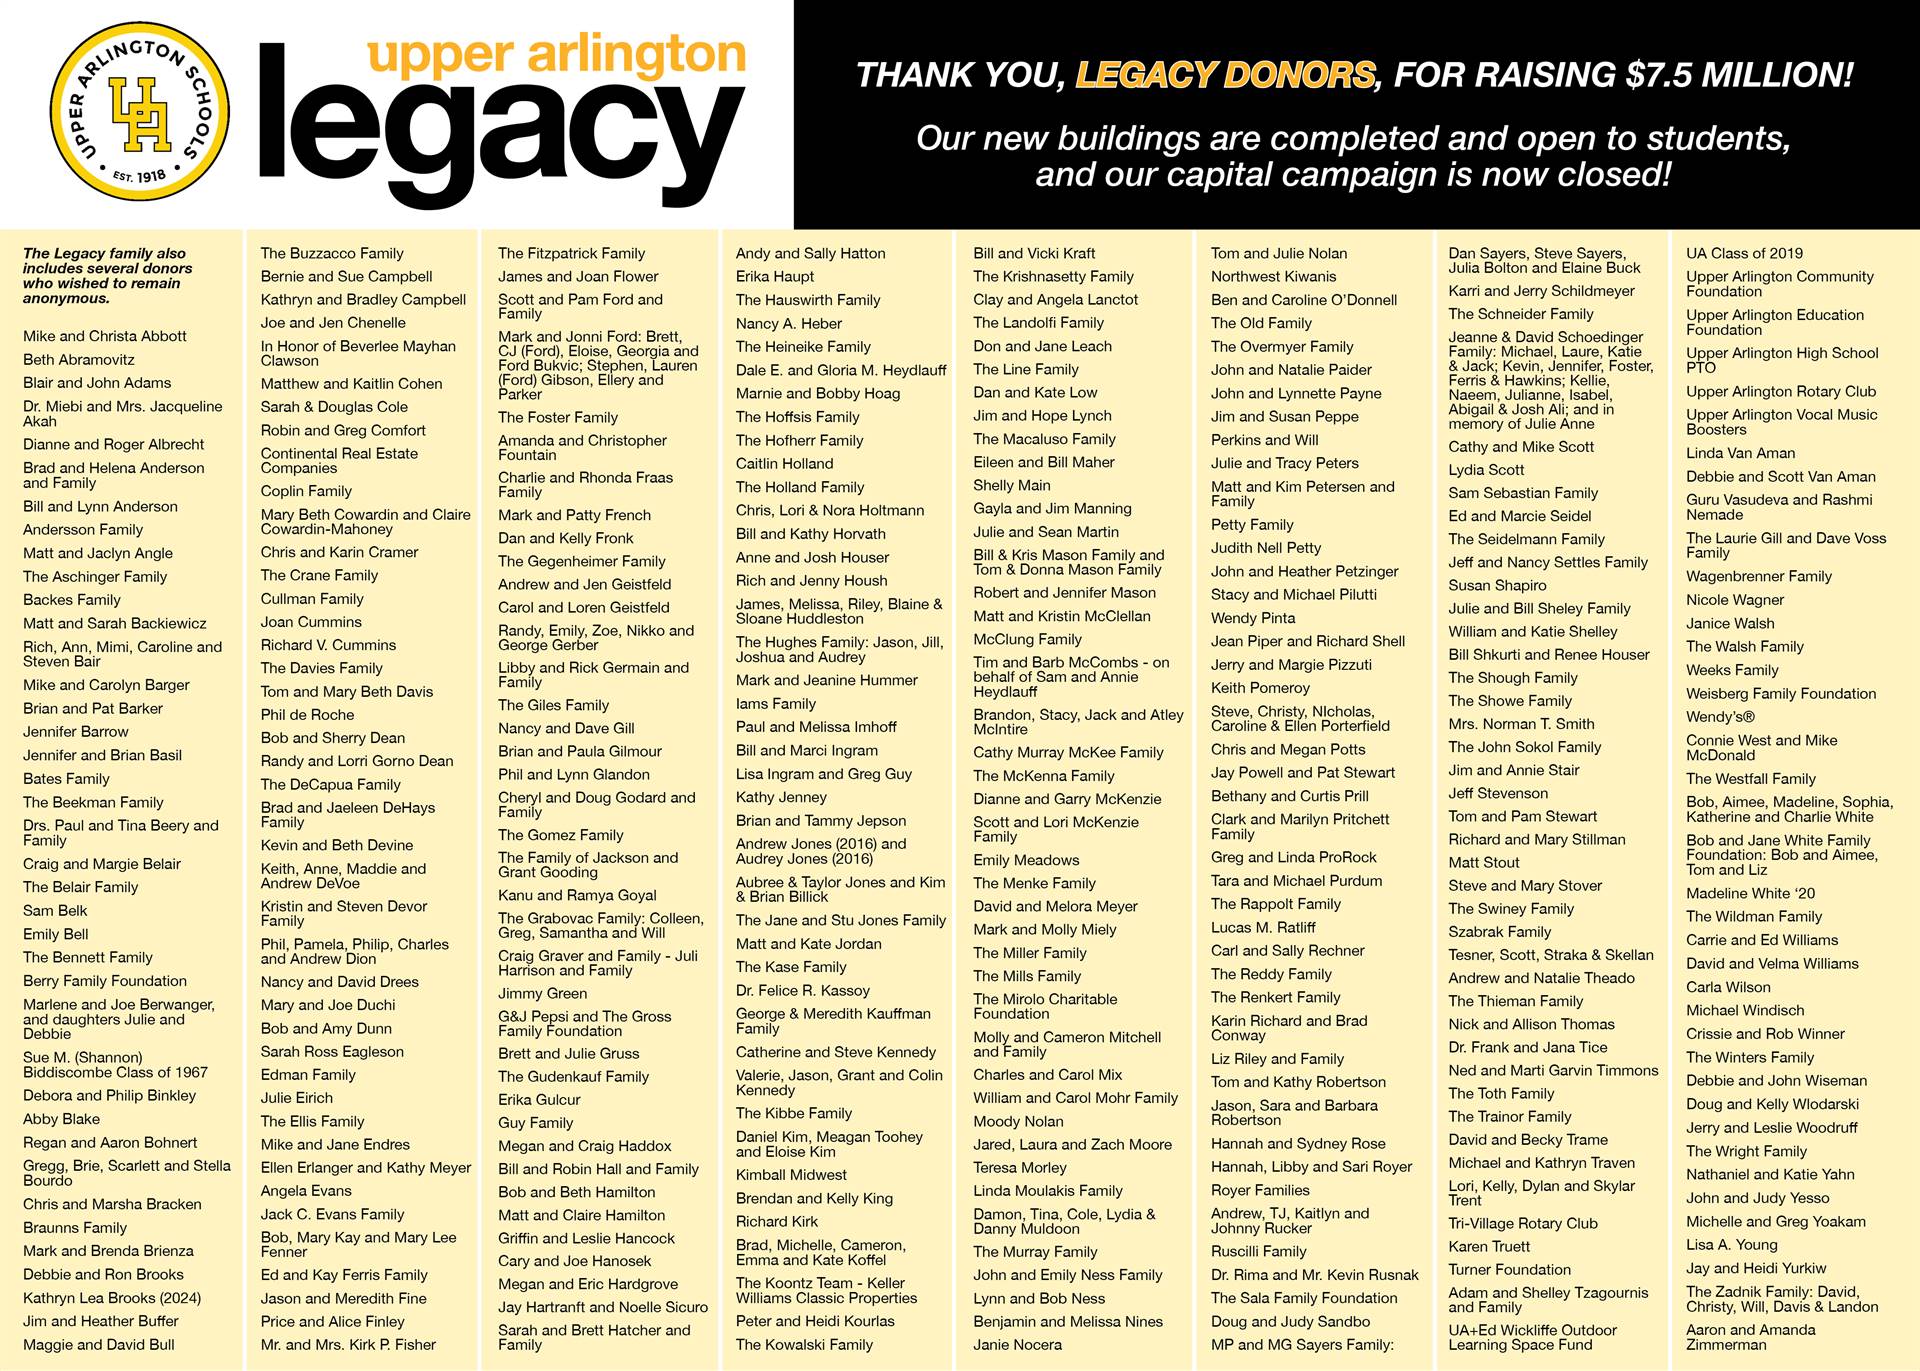 Legacy Campaign donors list